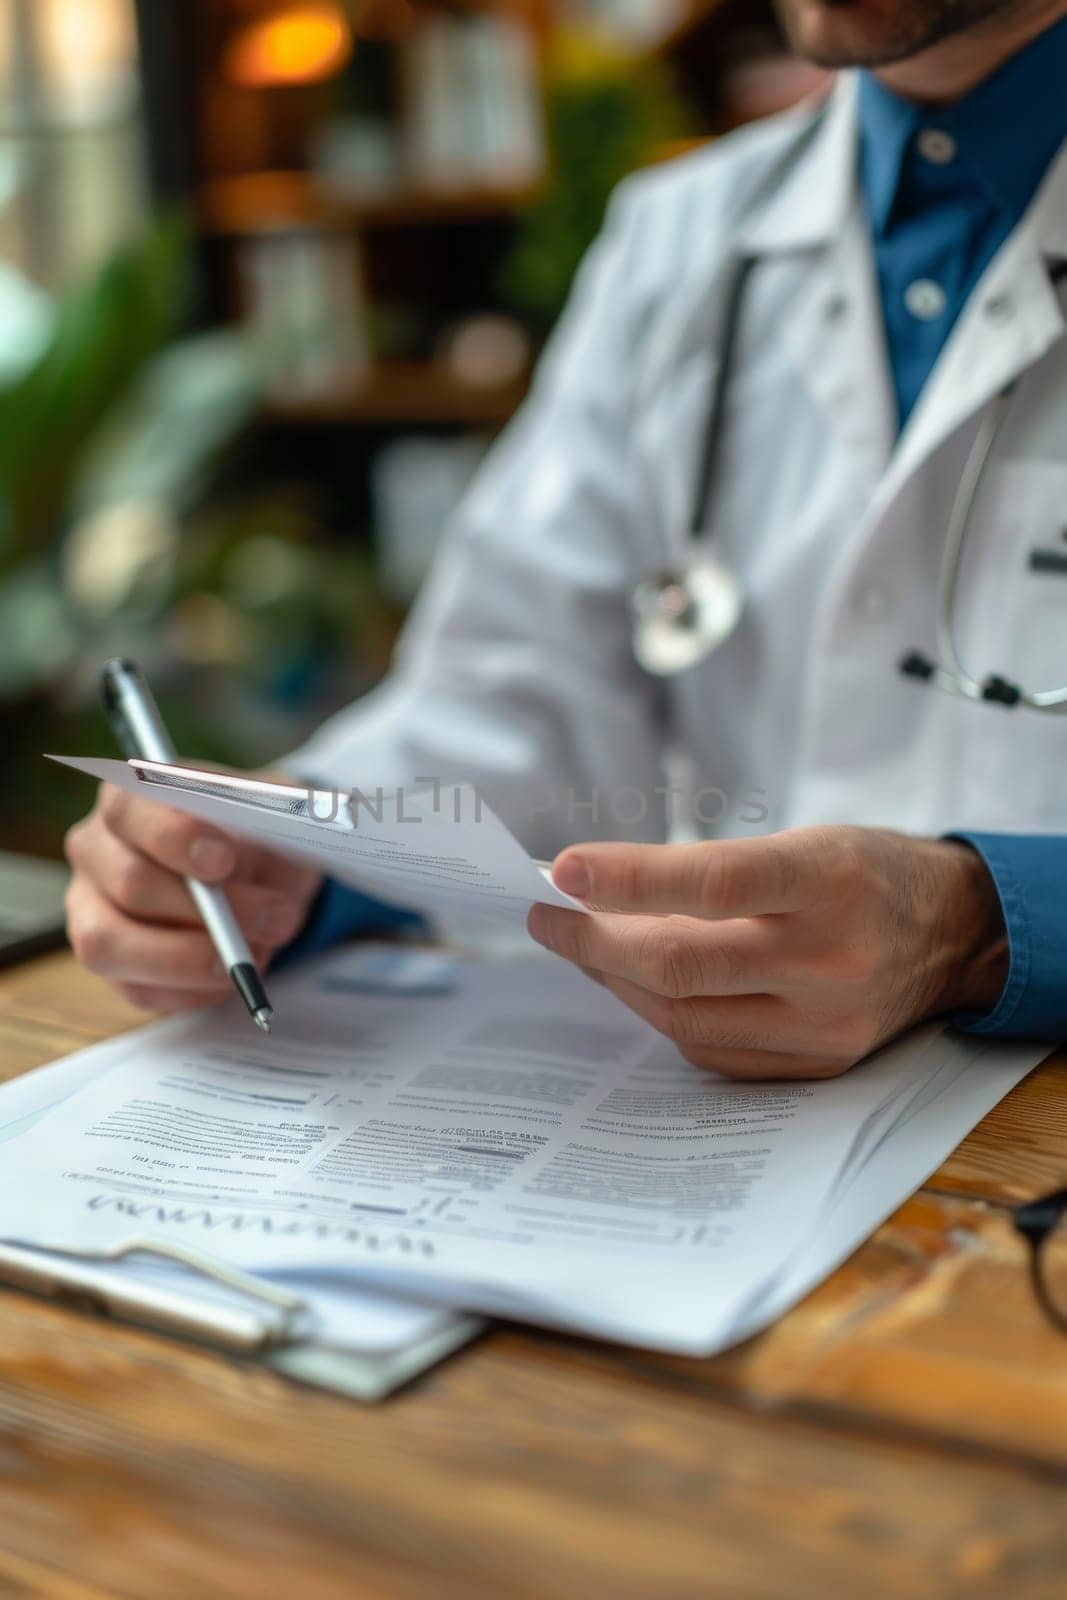 A doctor is sitting at a desk with a clipboard and a pen. He is reading a piece of paper and writing something down. Concept of professionalism and focus